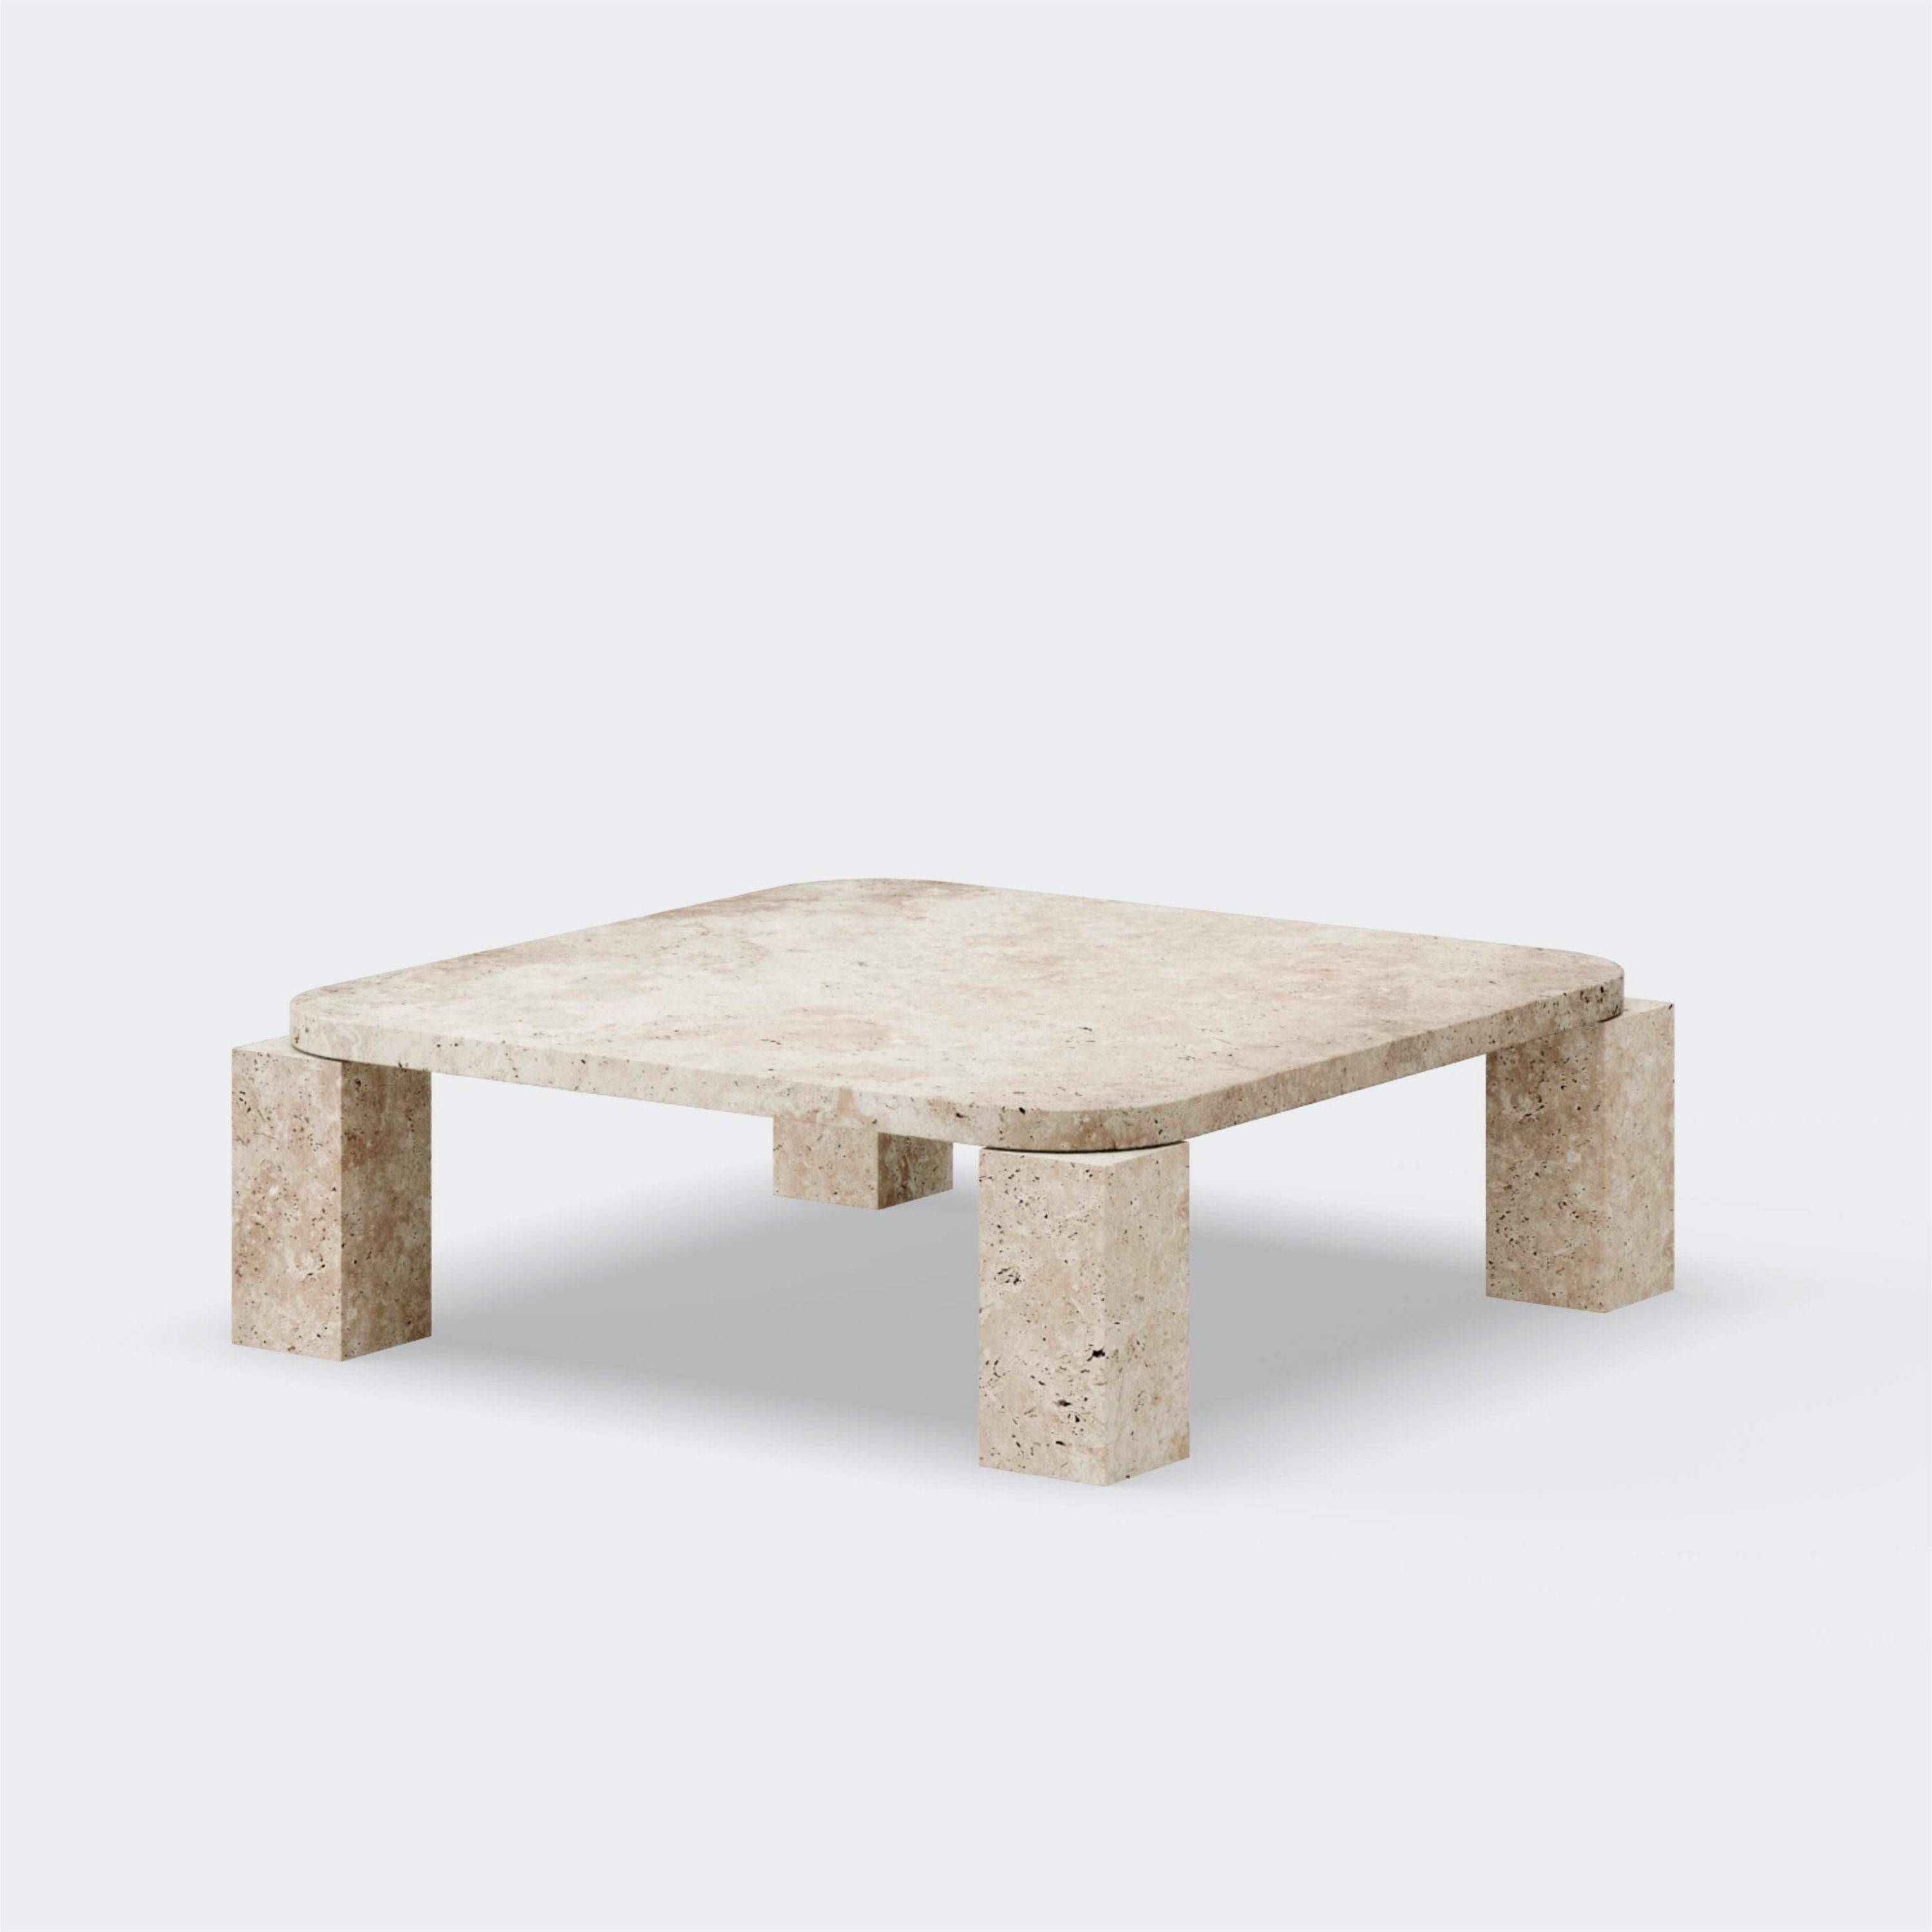 New Works Atlas Coffee Table Large Travertine - KANSO